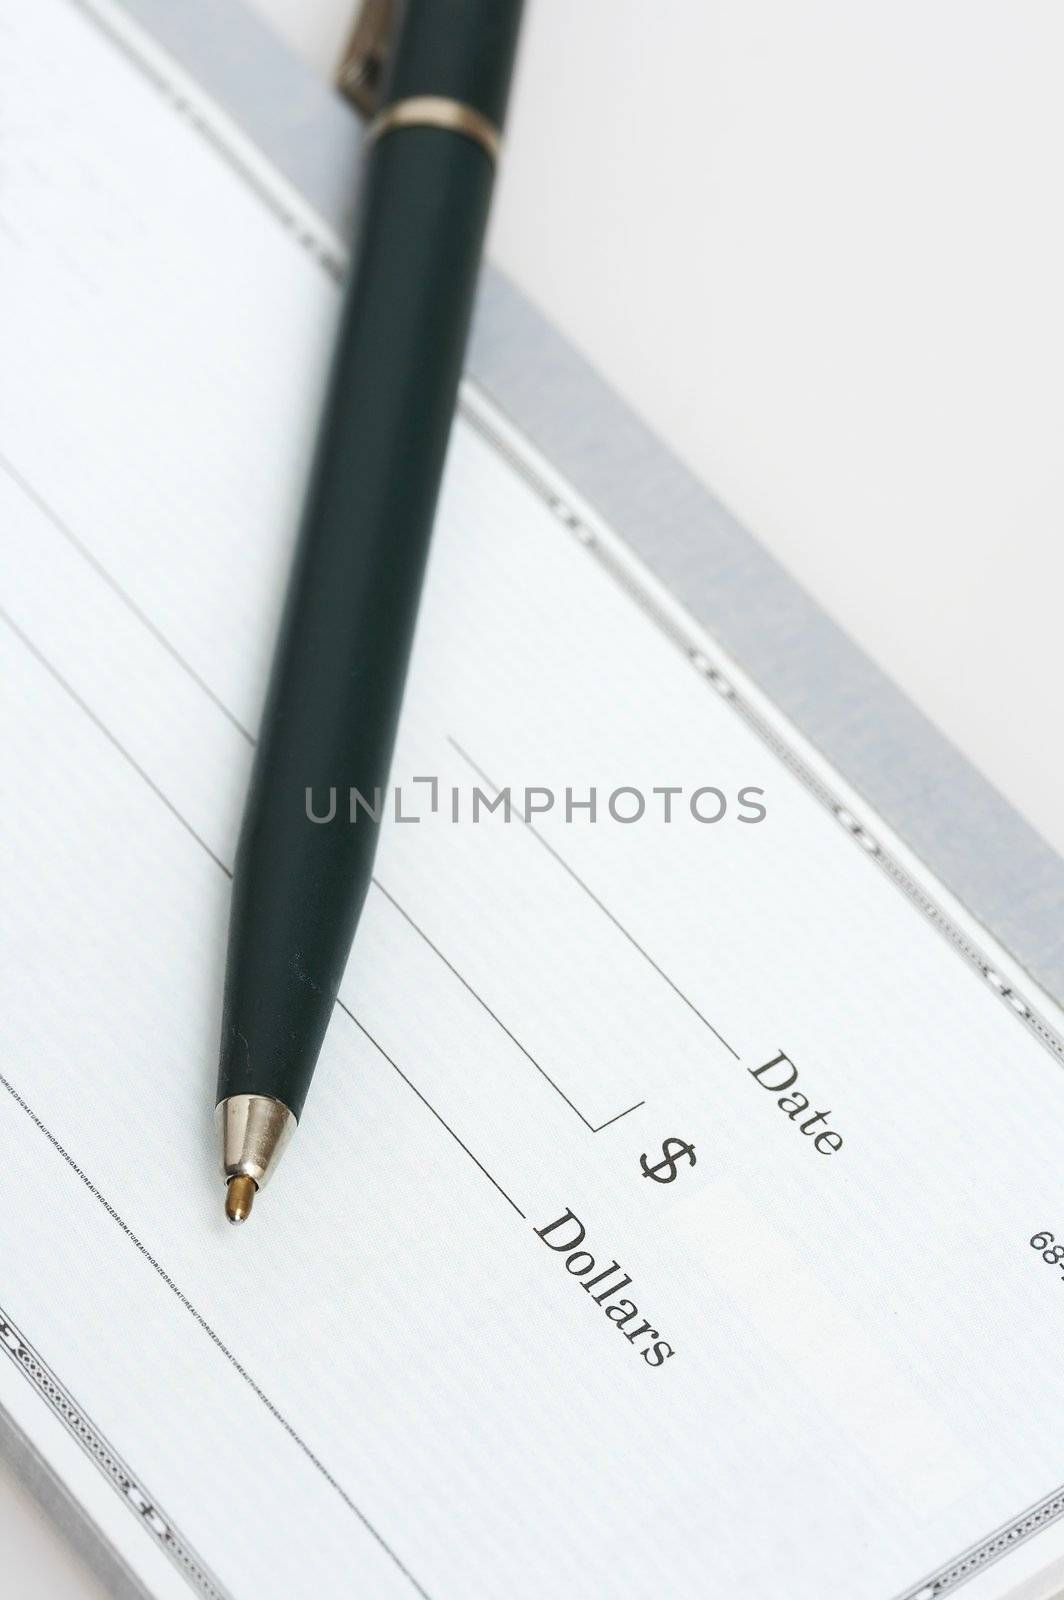 a close up picture of a pen and check